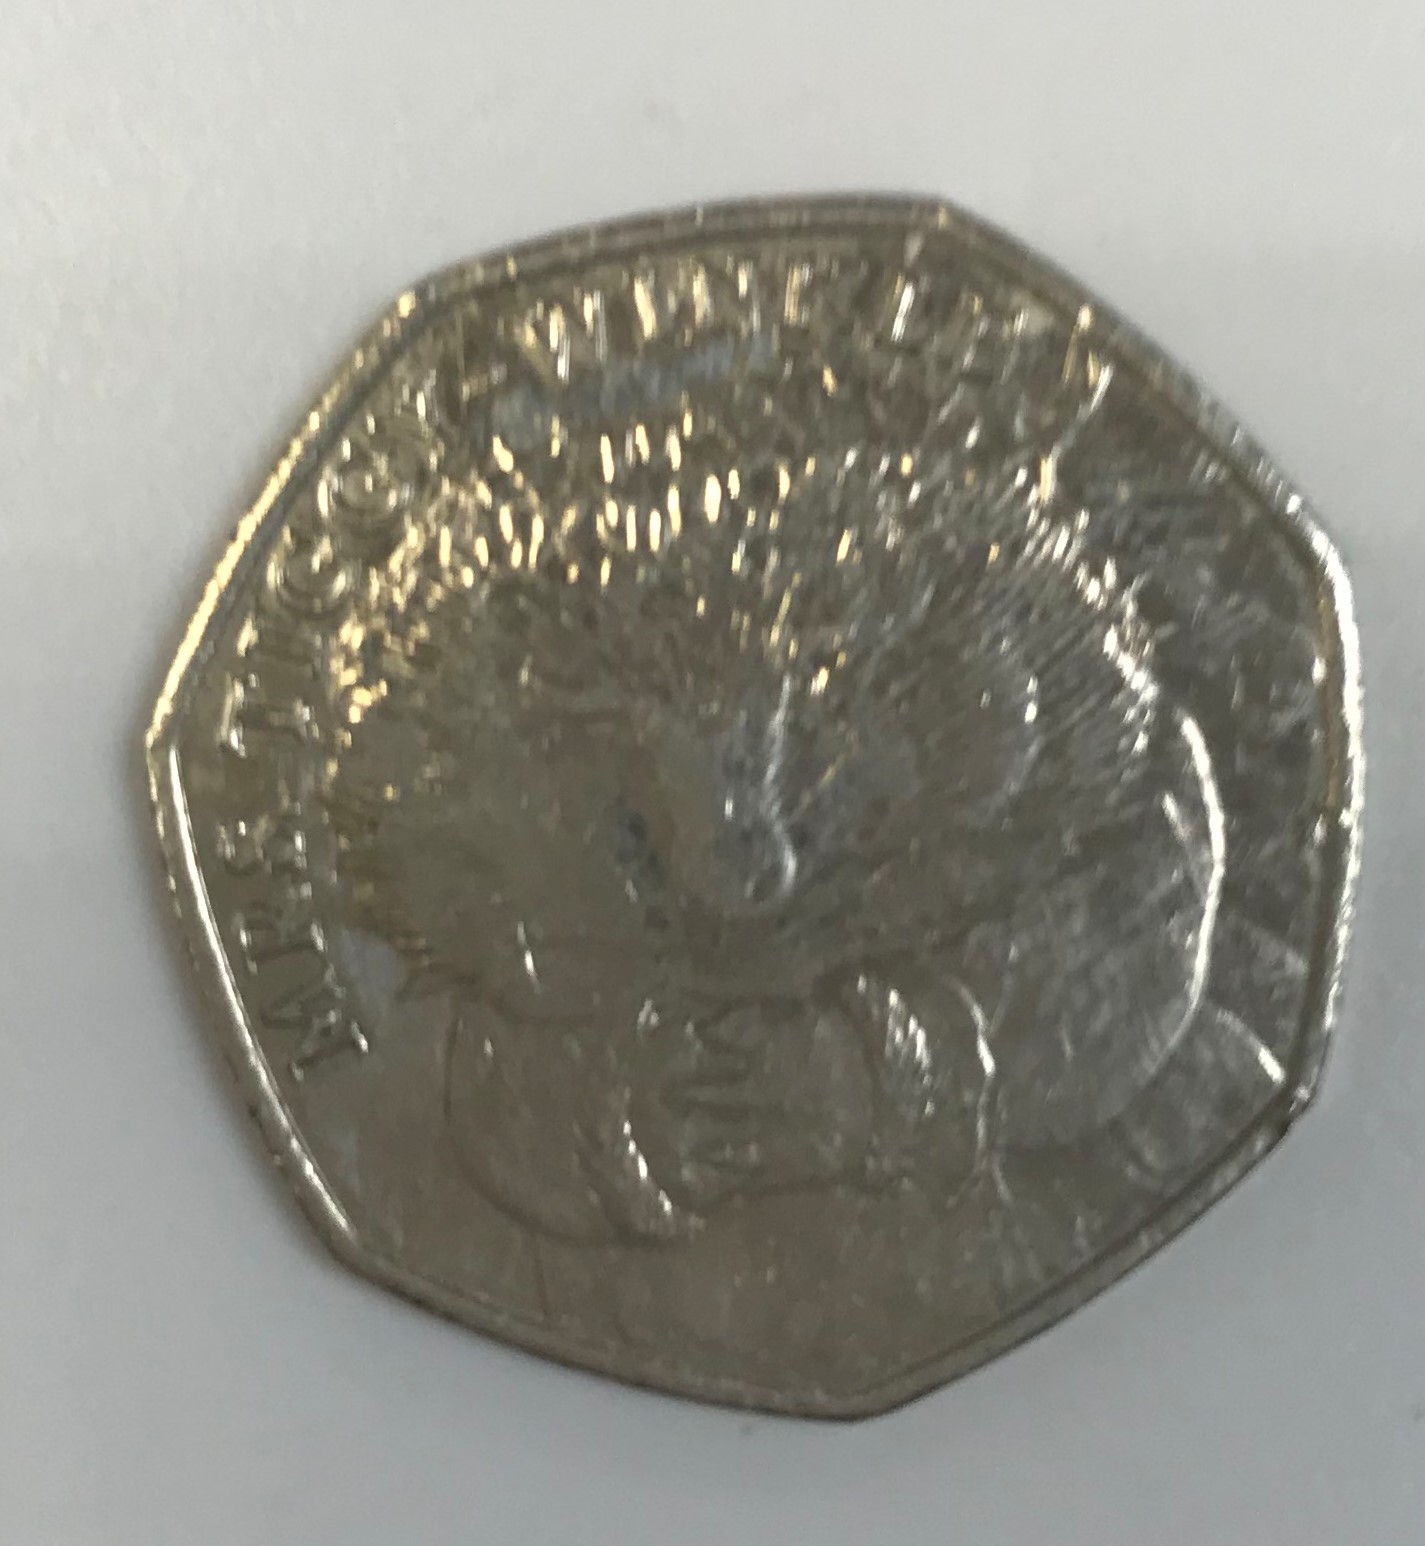 A collection of Beatrix Potter Commemorative 50 p pieces including “Benjamin Bunny” 2017 (x 15), - Image 3 of 3